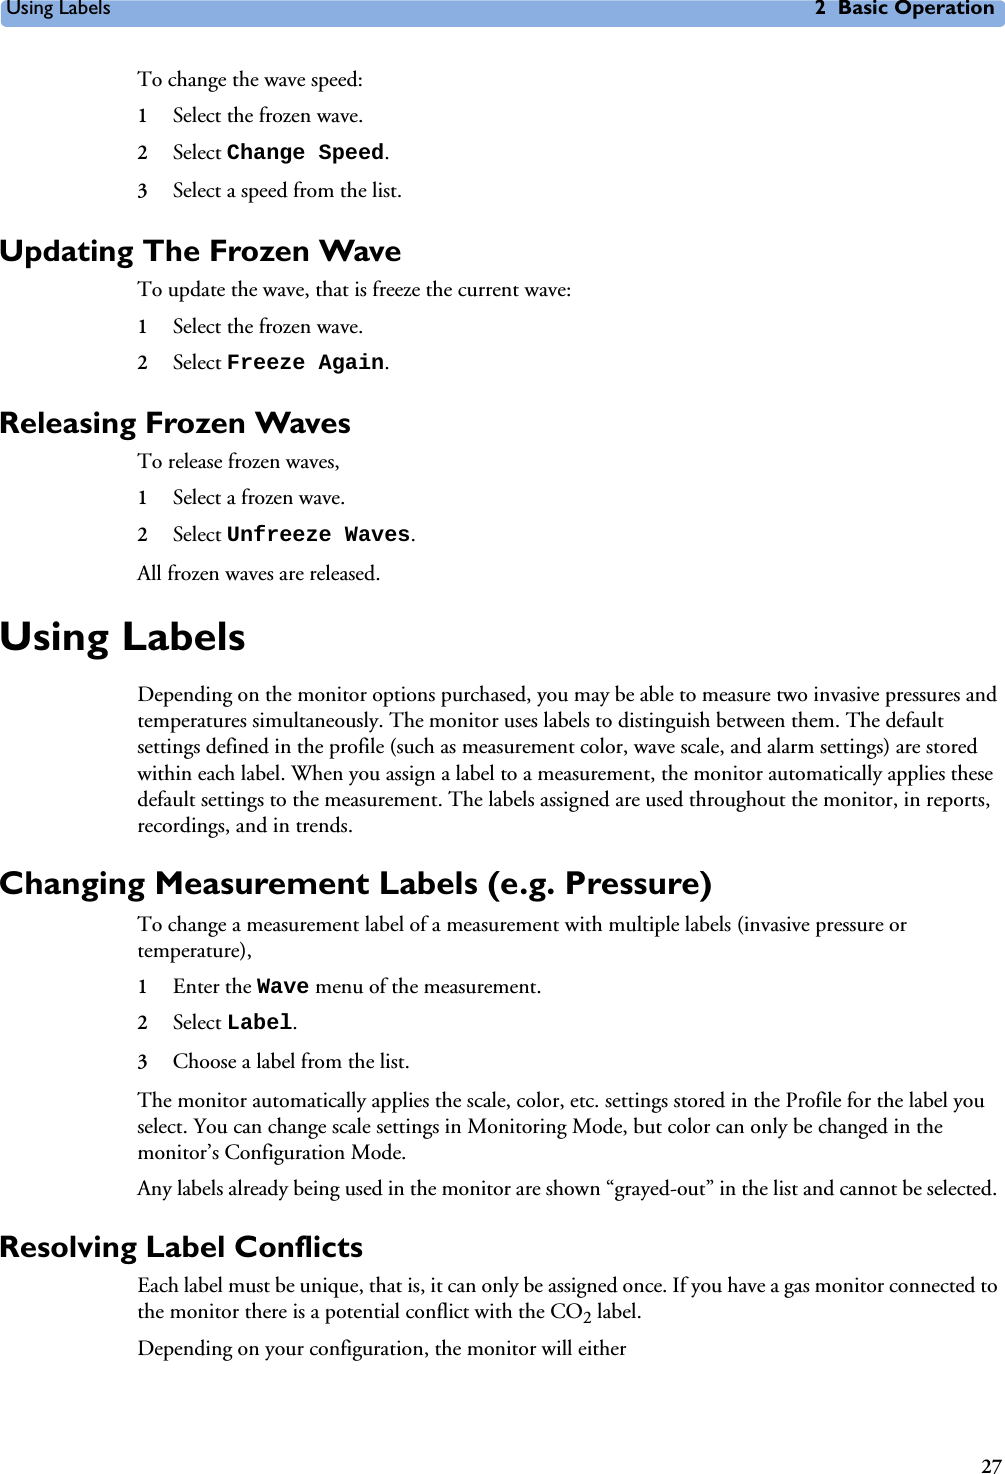 Using Labels 2 Basic Operation27To change the wave speed:1Select the frozen wave.2Select Change Speed.3Select a speed from the list.Updating The Frozen WaveTo update the wave, that is freeze the current wave:1Select the frozen wave.2Select Freeze Again.Releasing Frozen WavesTo release frozen waves,1Select a frozen wave.2Select Unfreeze Waves.All frozen waves are released.Using LabelsDepending on the monitor options purchased, you may be able to measure two invasive pressures and temperatures simultaneously. The monitor uses labels to distinguish between them. The default settings defined in the profile (such as measurement color, wave scale, and alarm settings) are stored within each label. When you assign a label to a measurement, the monitor automatically applies these default settings to the measurement. The labels assigned are used throughout the monitor, in reports, recordings, and in trends.Changing Measurement Labels (e.g. Pressure)To change a measurement label of a measurement with multiple labels (invasive pressure or temperature),1Enter the Wave menu of the measurement. 2Select Label.3Choose a label from the list.The monitor automatically applies the scale, color, etc. settings stored in the Profile for the label you select. You can change scale settings in Monitoring Mode, but color can only be changed in the monitor’s Configuration Mode. Any labels already being used in the monitor are shown “grayed-out” in the list and cannot be selected. Resolving Label Conflicts Each label must be unique, that is, it can only be assigned once. If you have a gas monitor connected to the monitor there is a potential conflict with the CO2 label.Depending on your configuration, the monitor will either 